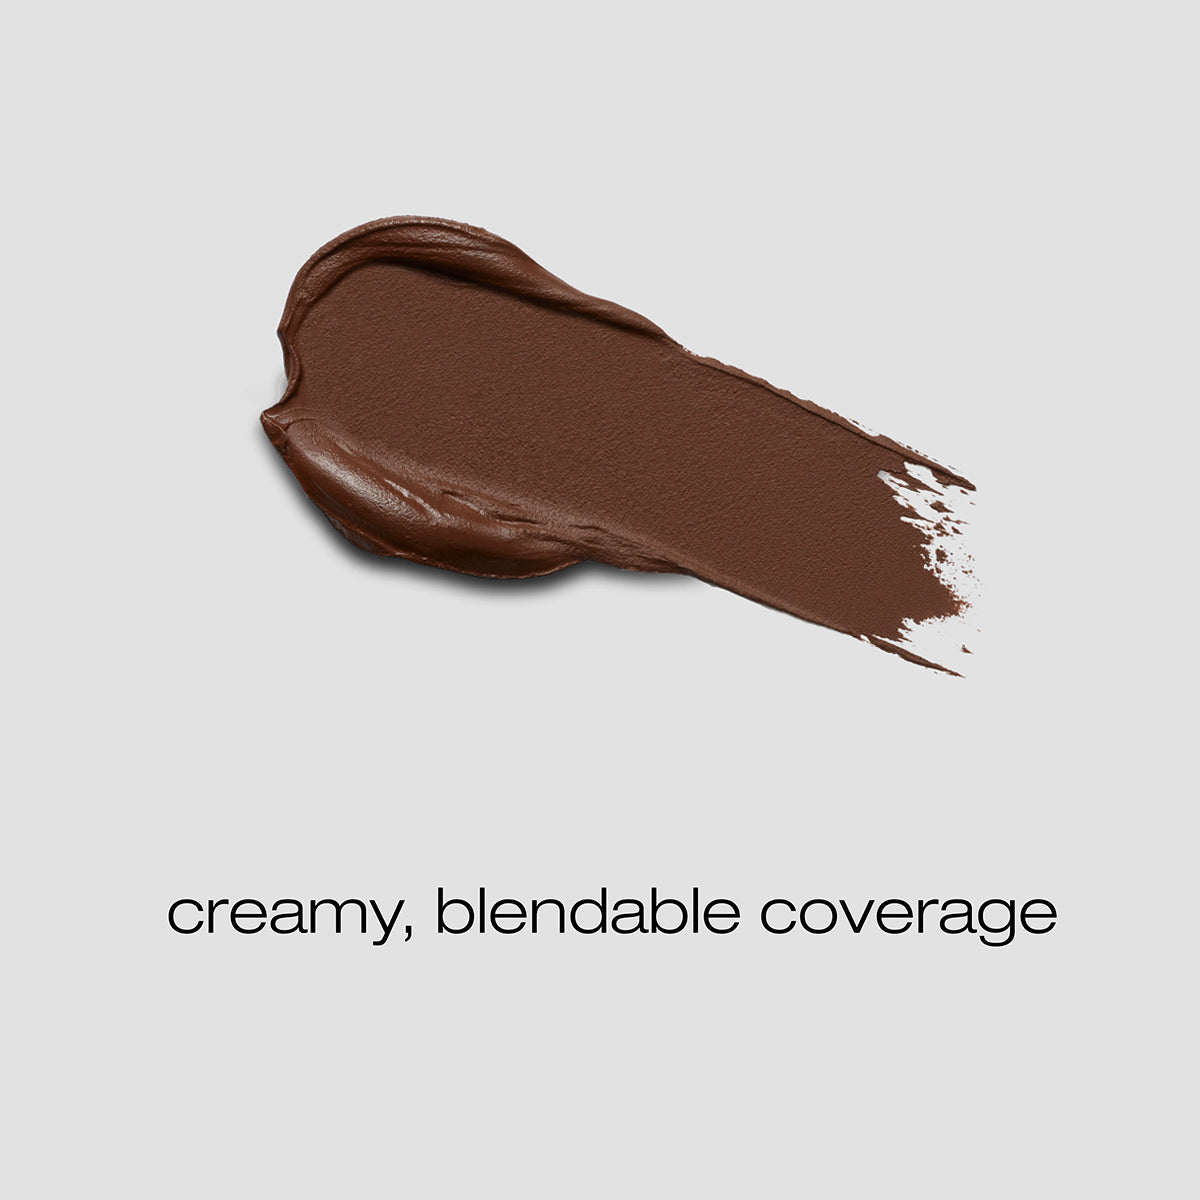 Spread of the Lavacake concealer with description of creamy, blendable coverage